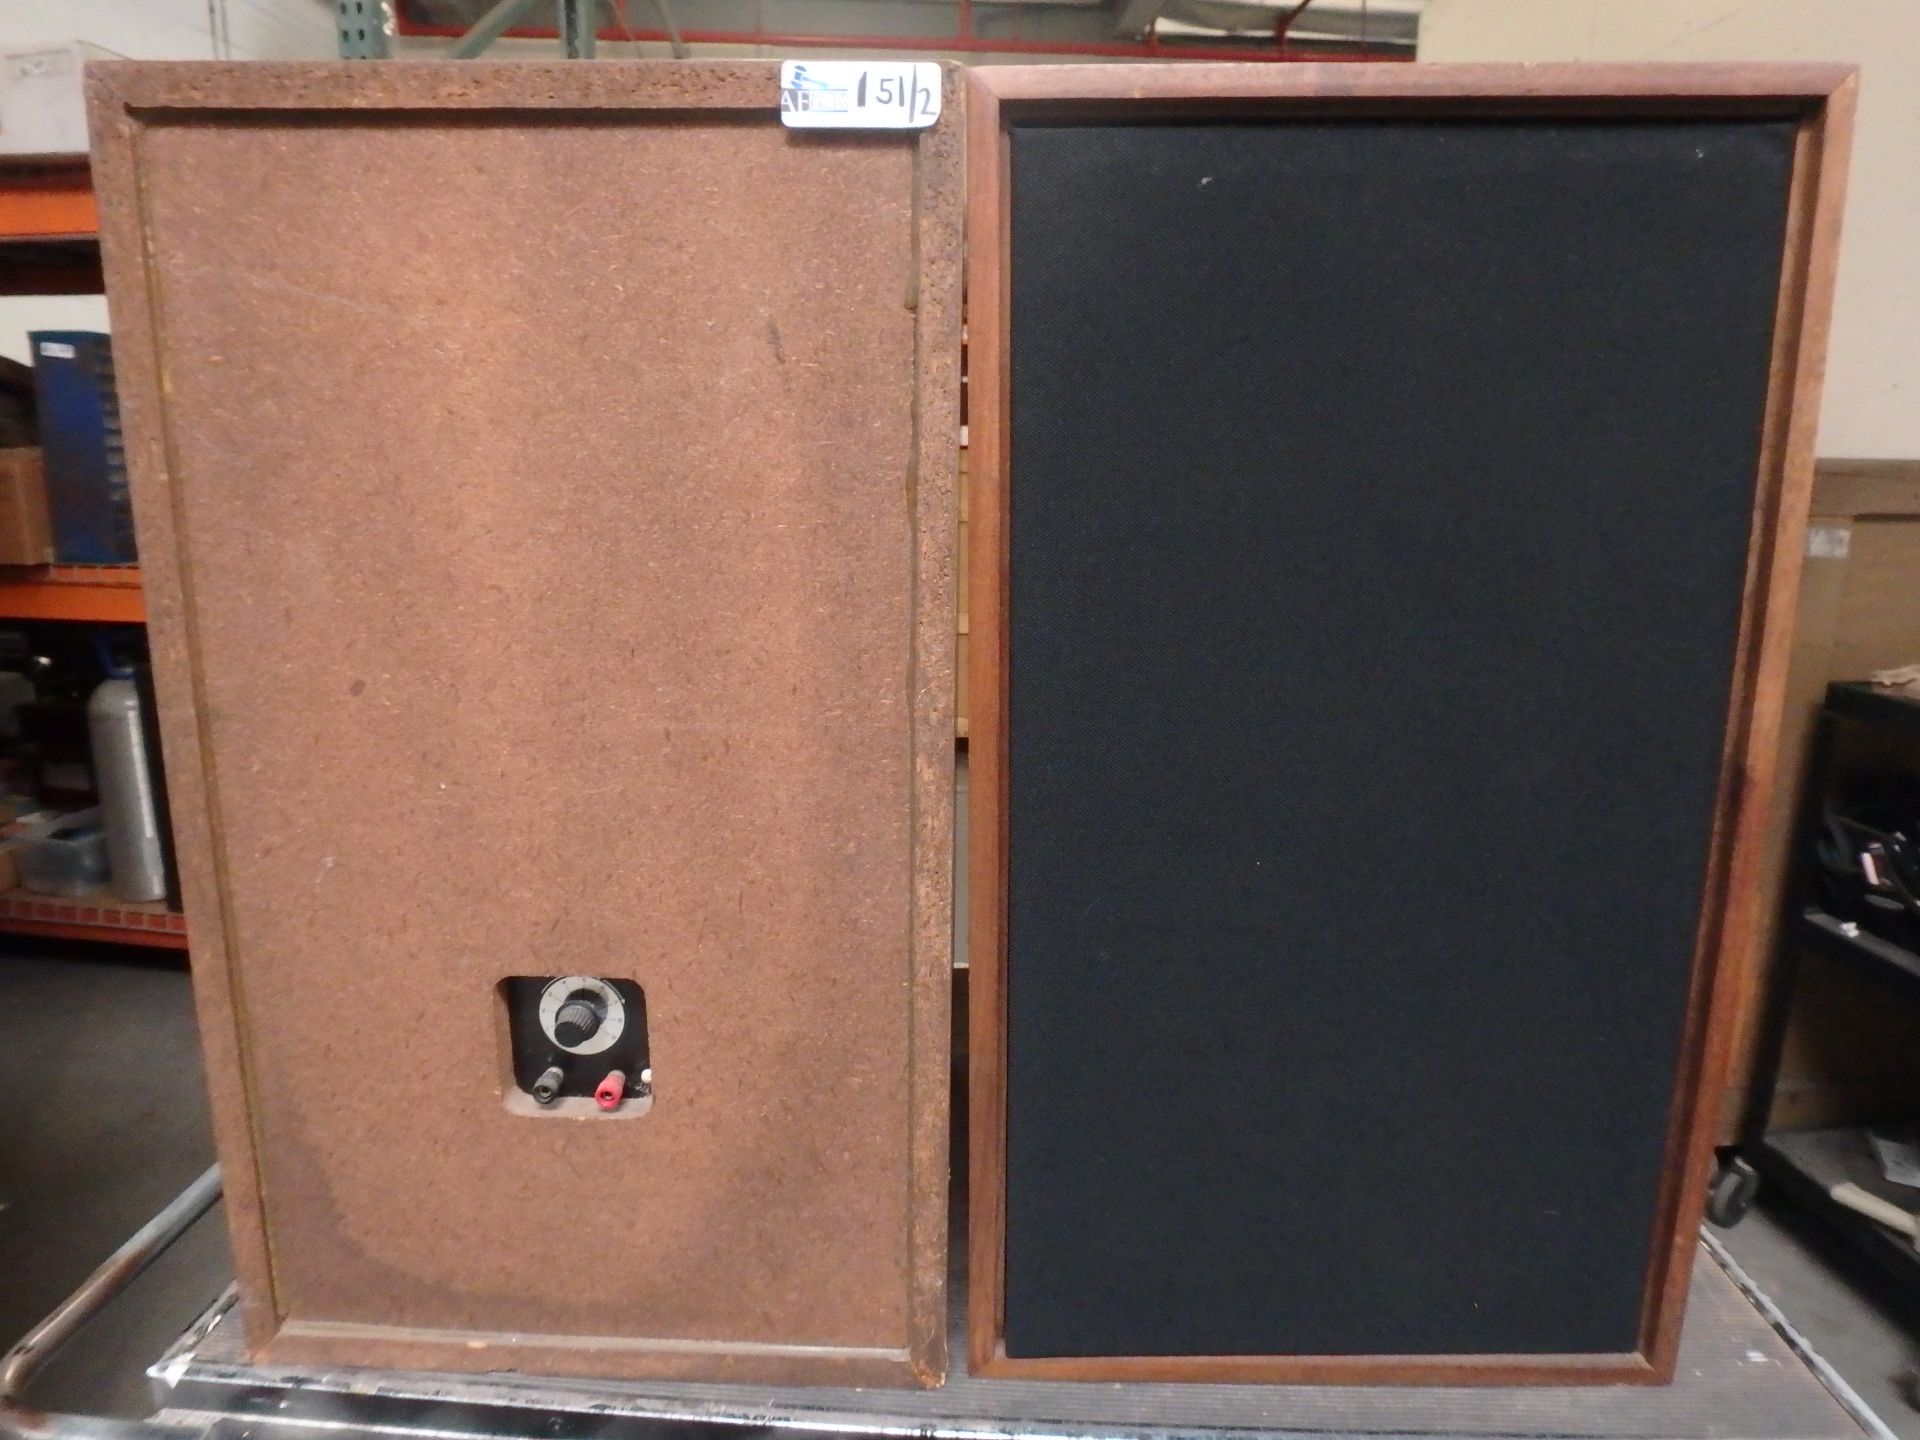 LOT OF 2 VINTAGE STEREO SPEAKERS - Image 2 of 3